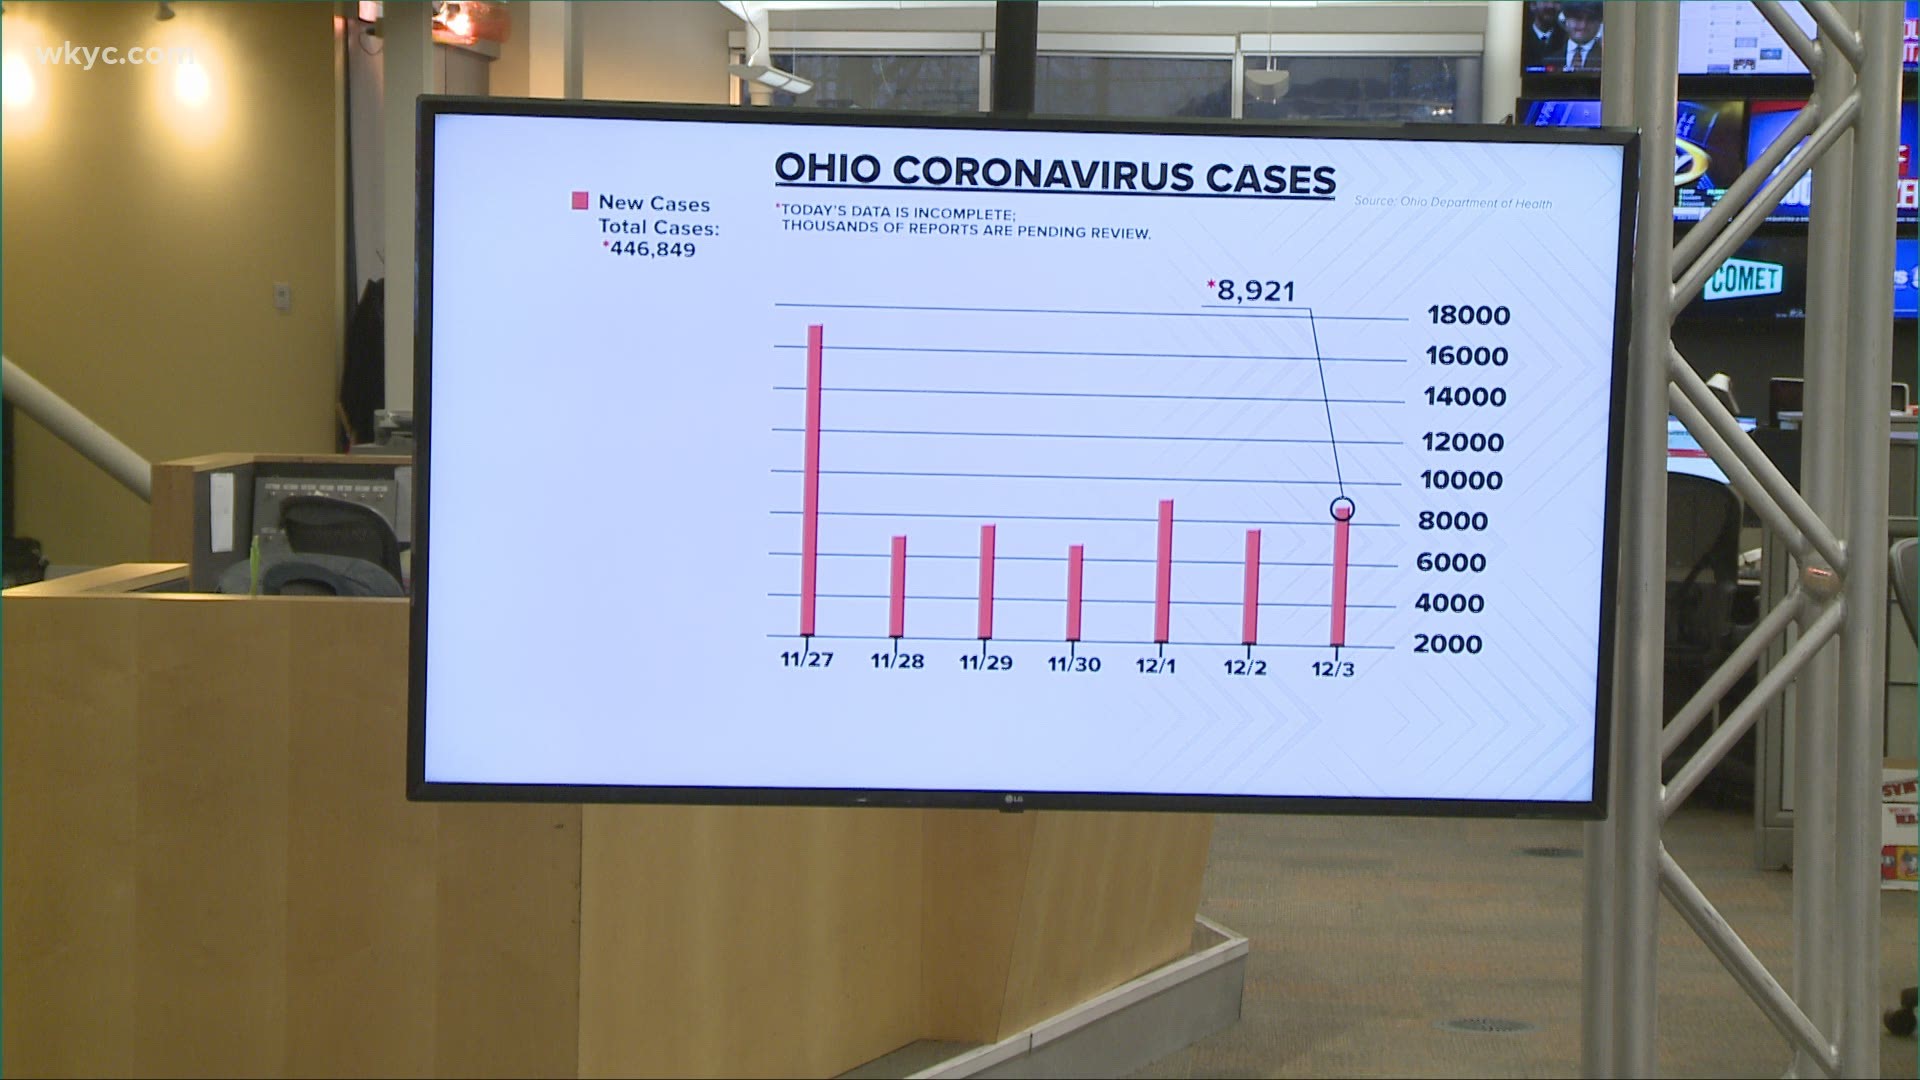 The Ohio Health Department reported 8,921 new cases.  That's up more than a thousand from yesterday.